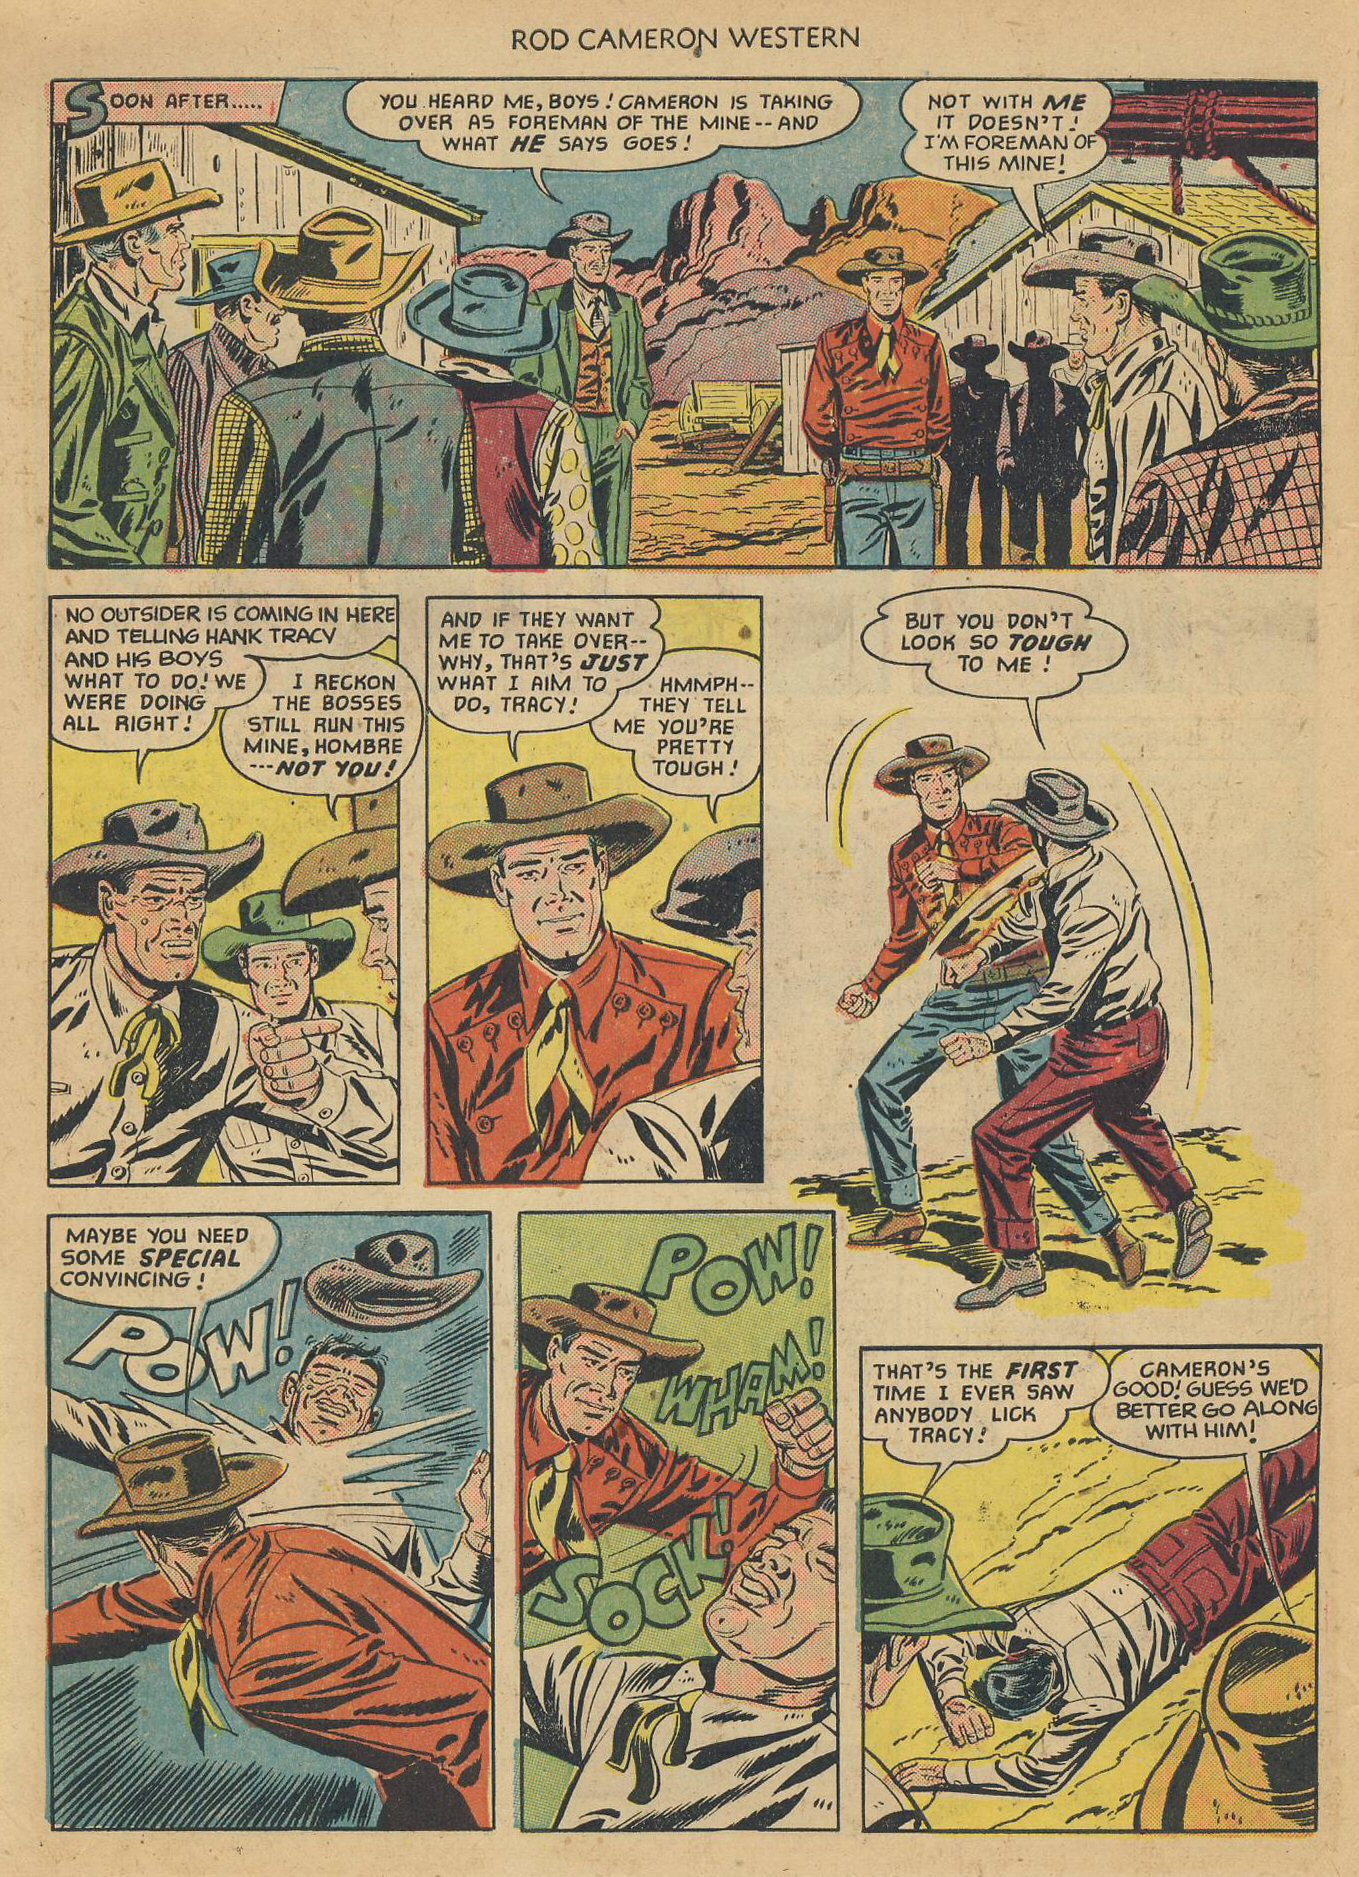 Read online Rod Cameron Western comic -  Issue #11 - 6